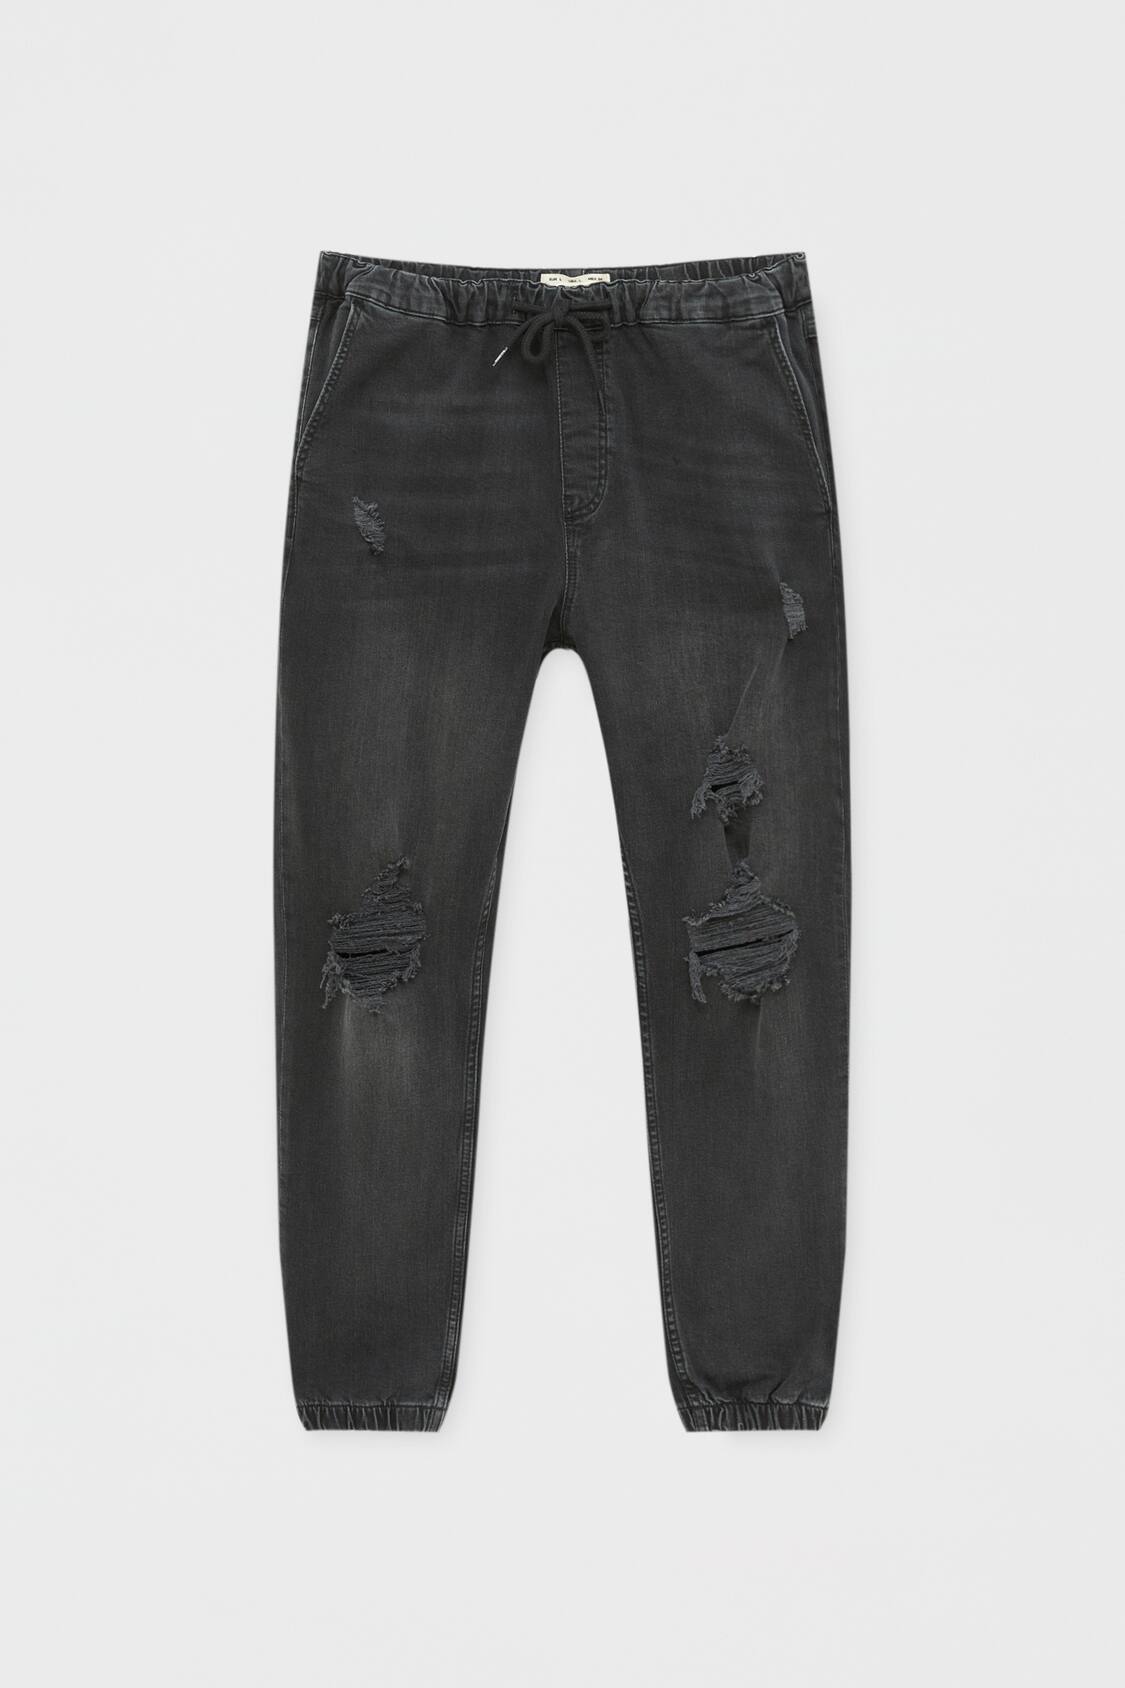 Ripped comfort fit jogger jeans